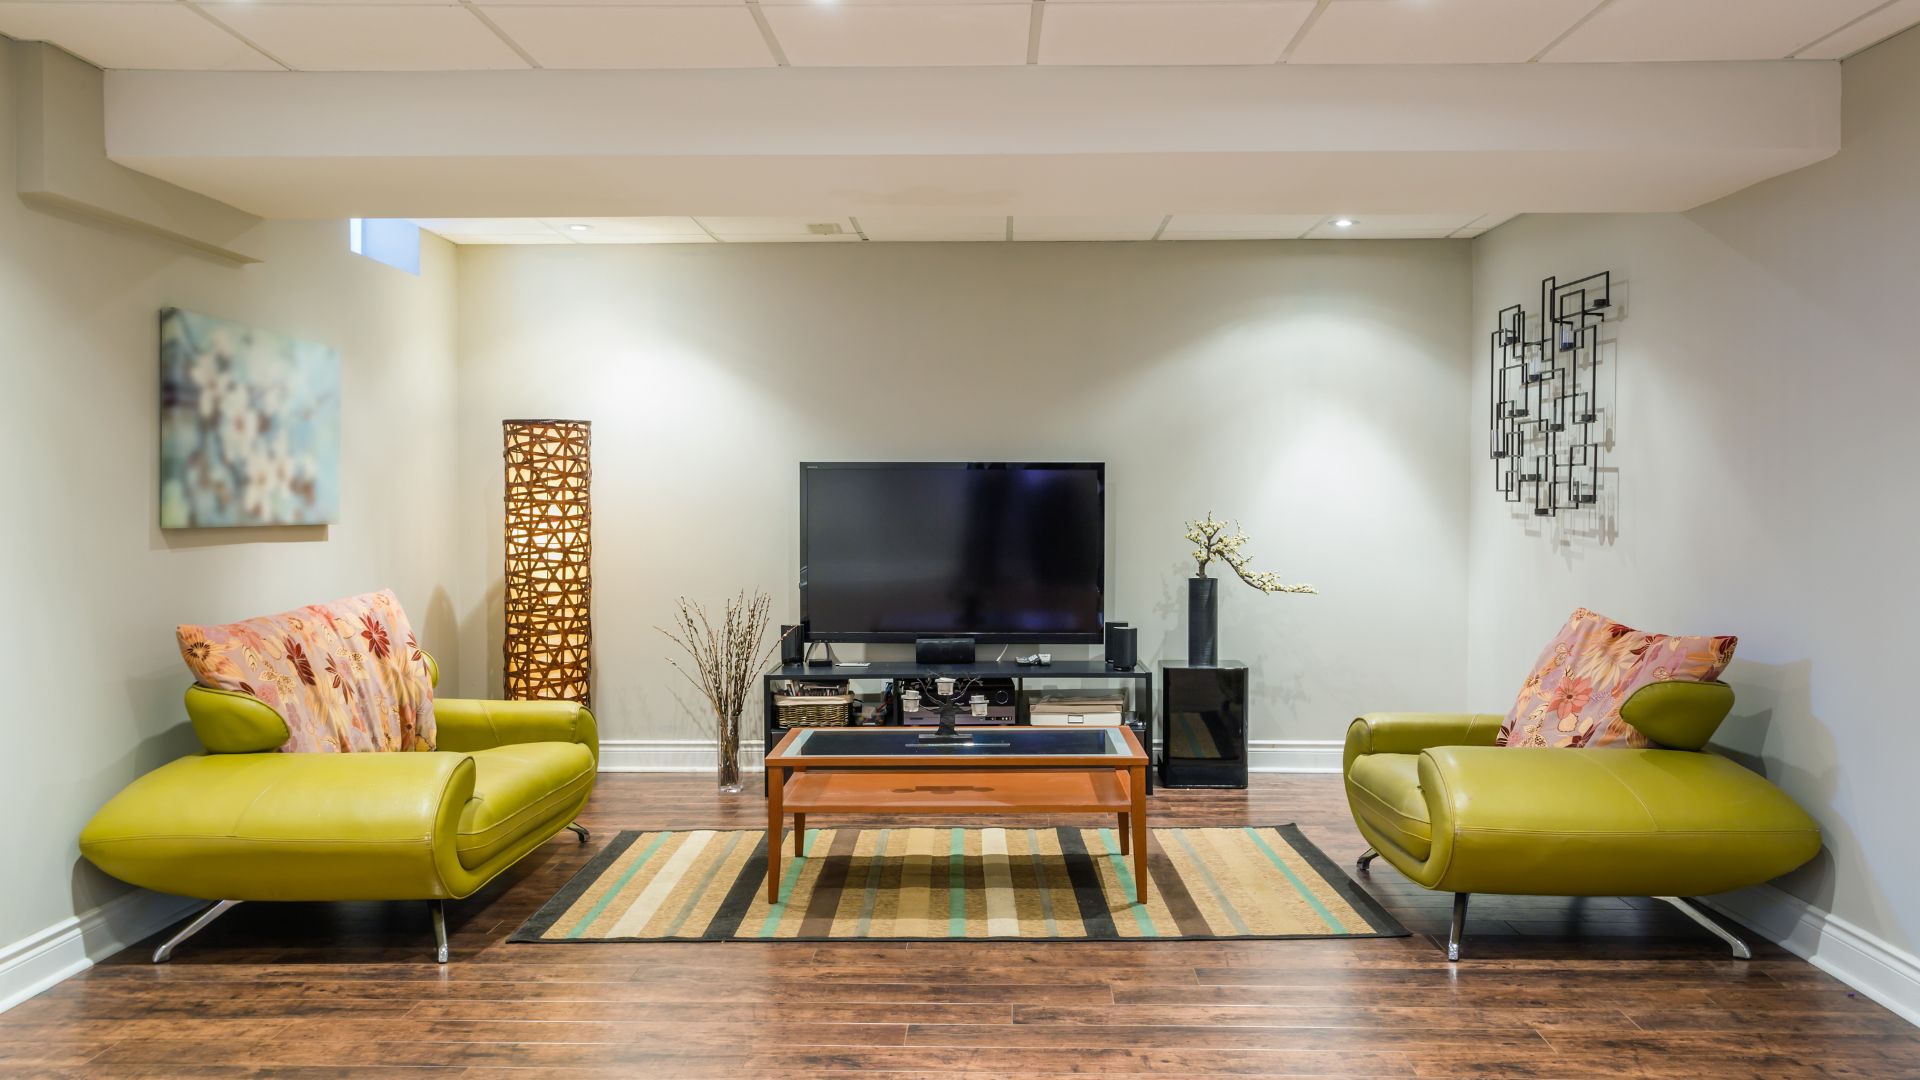 Living room in basement with widescreen television, green sofa and wood flooring